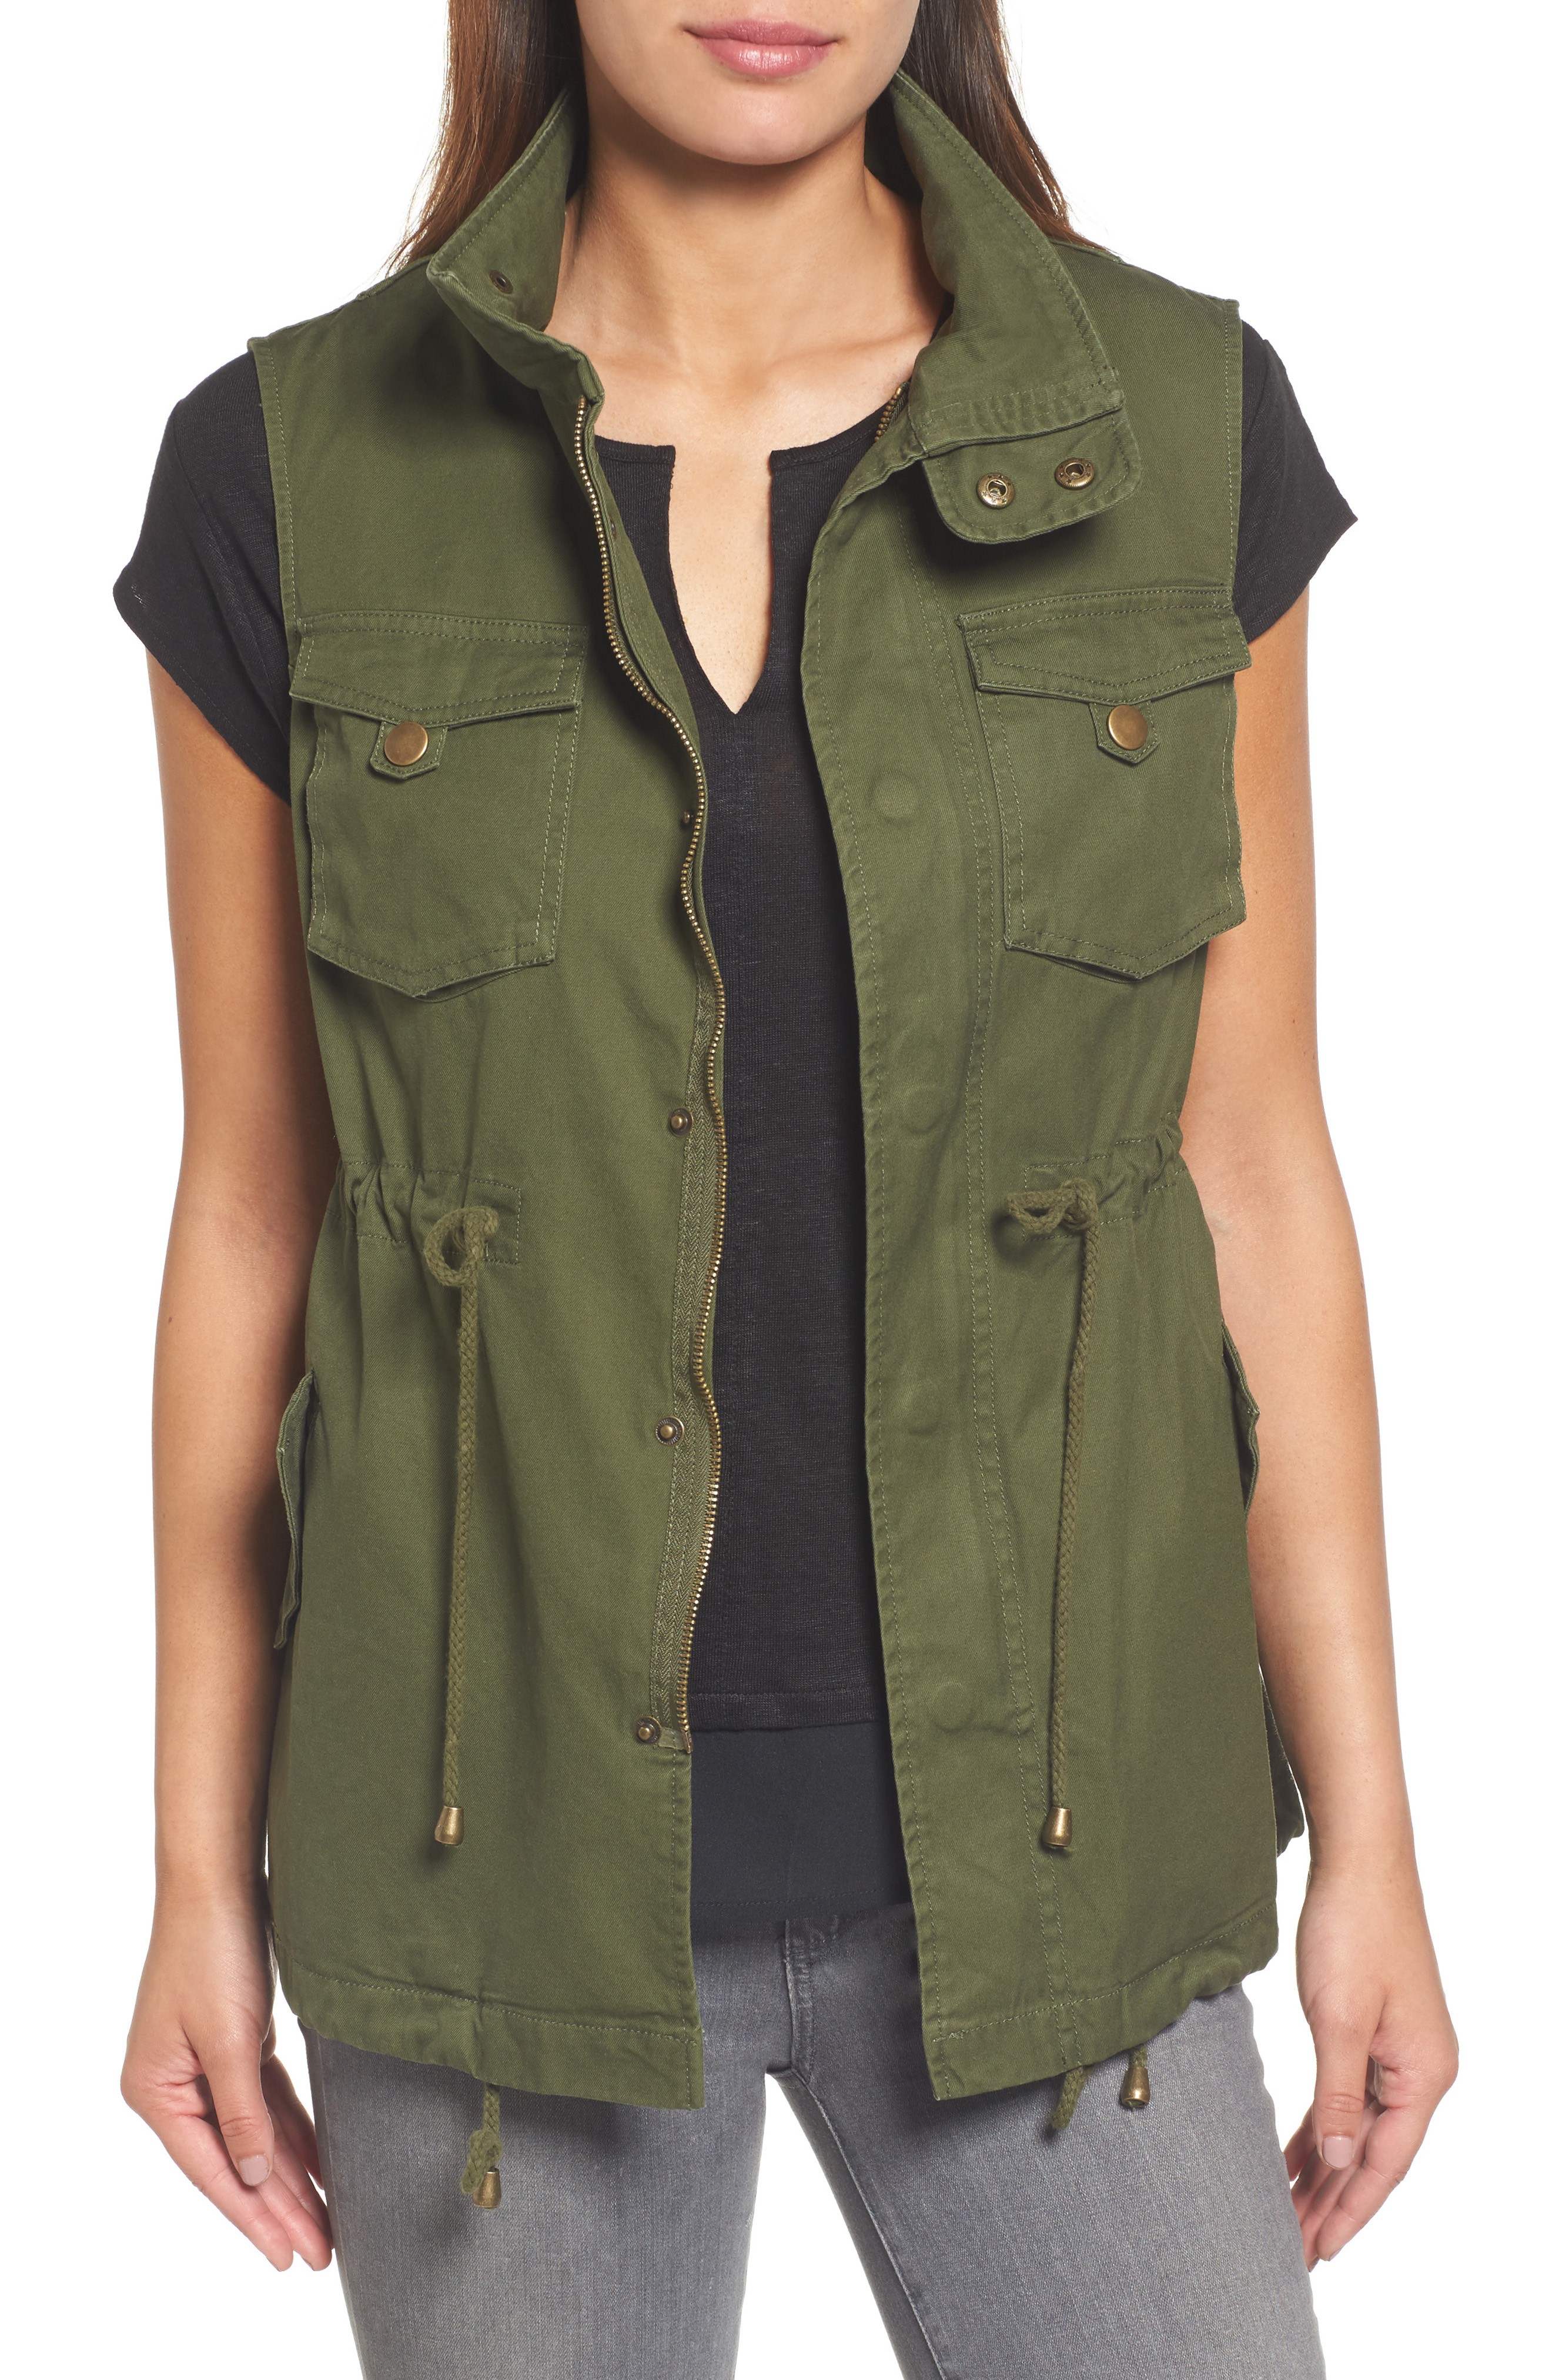 20 Preppy Vests for Fall - Kelly in the City